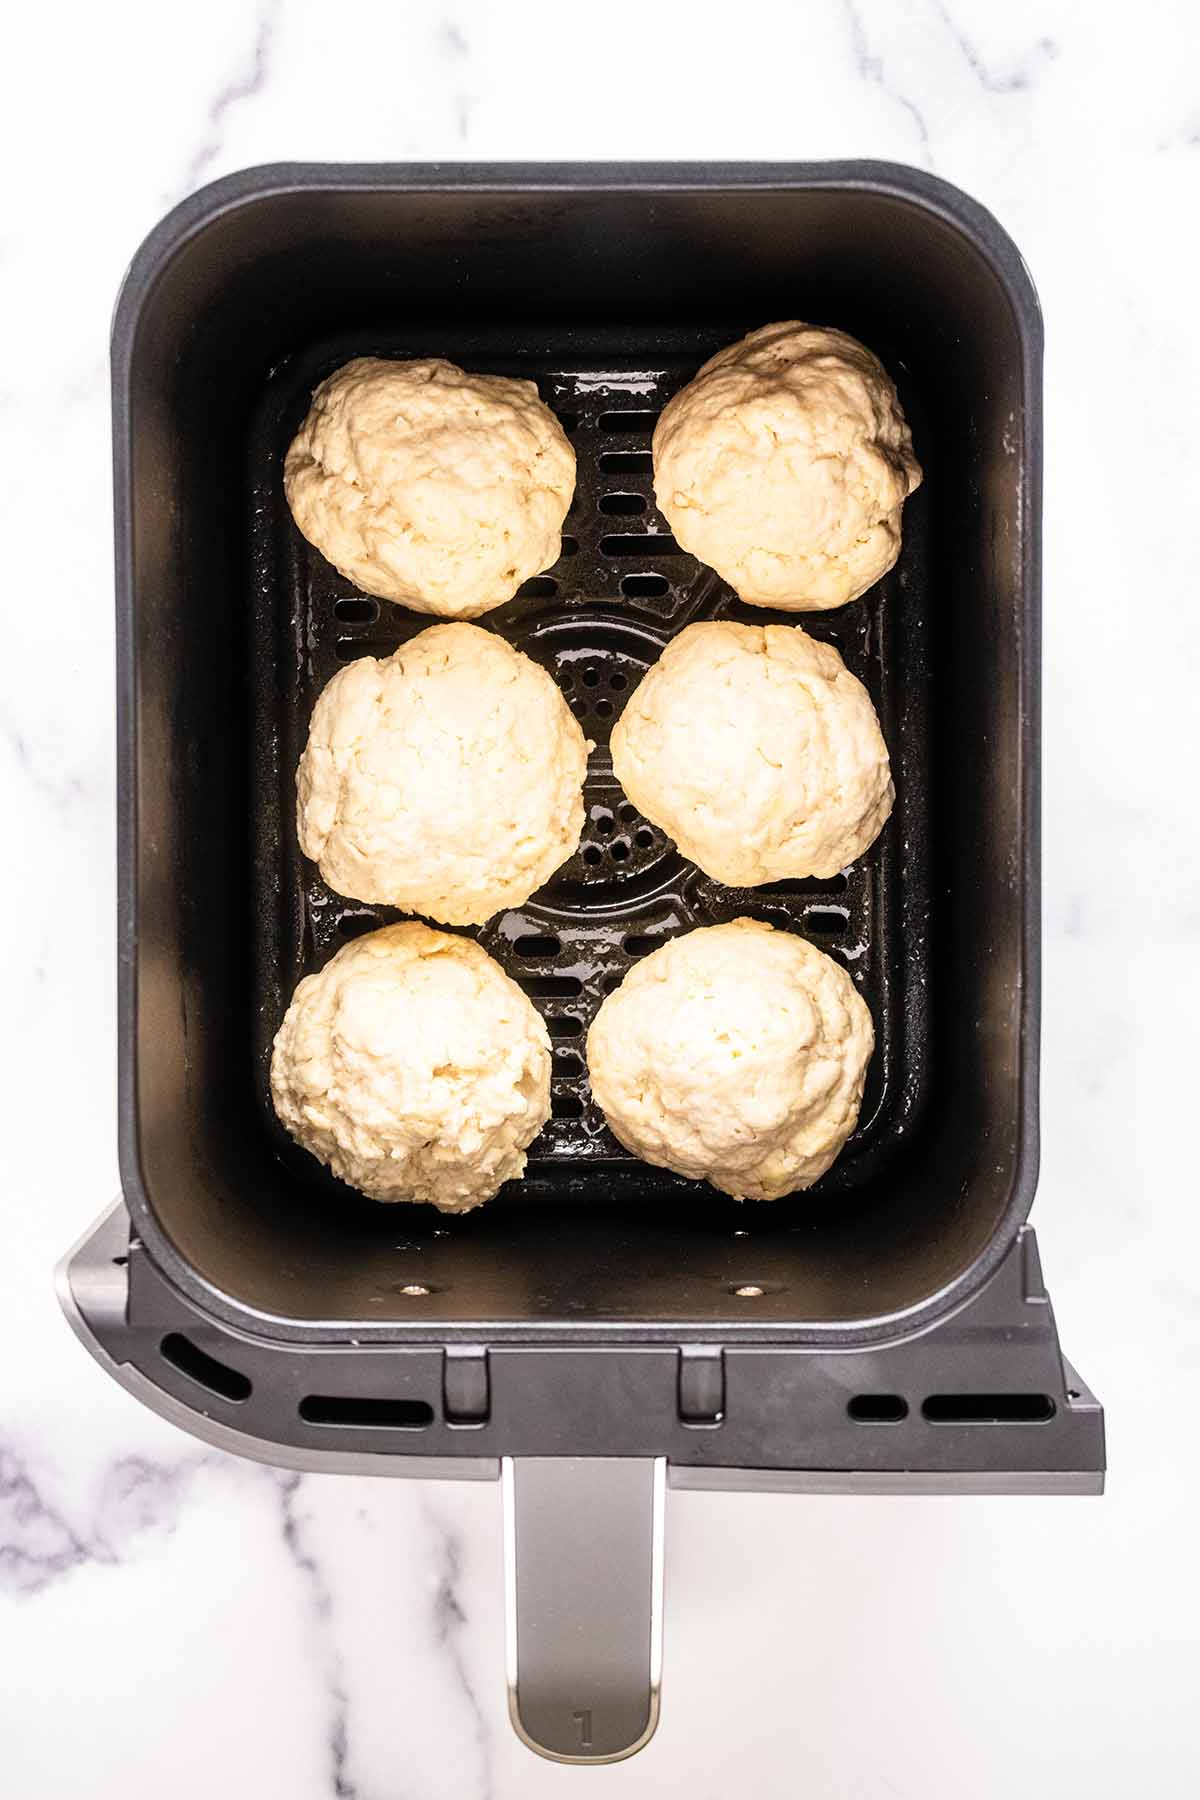 Six unbaked biscuits in an air fryer basket.